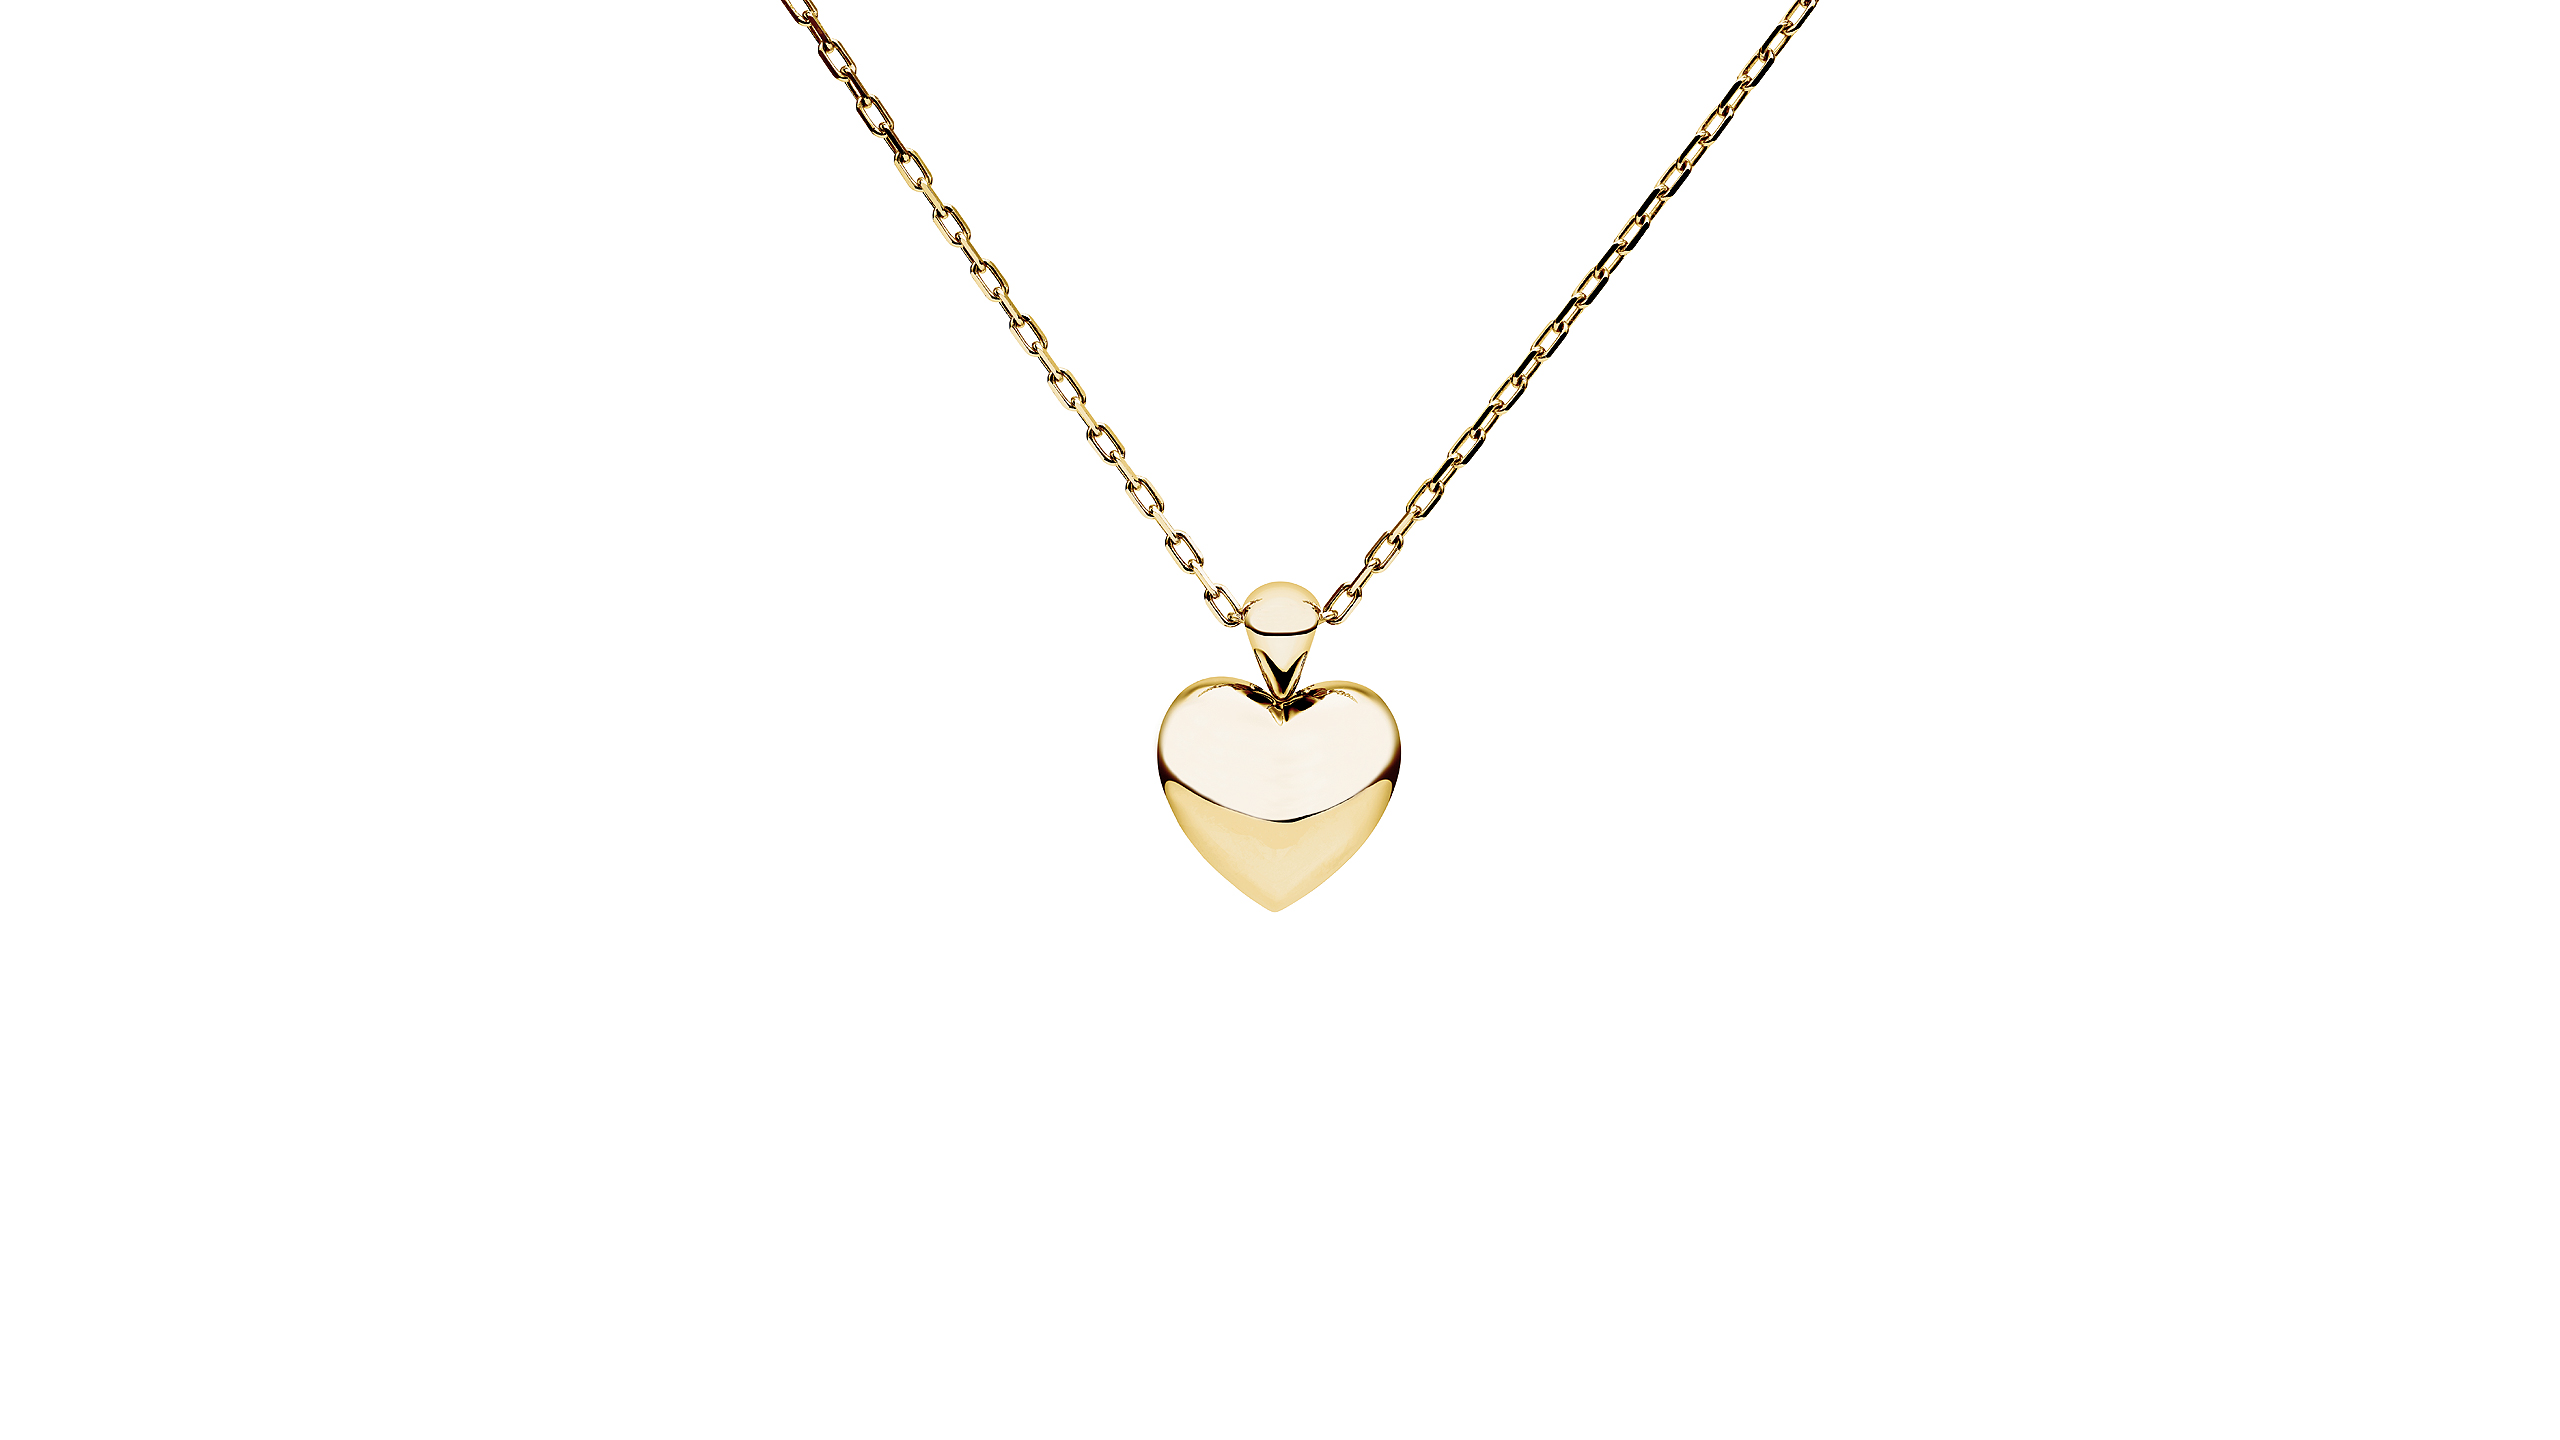 https://towejewels.com/wp-content/uploads/2014/10/TOWE_Y_gold_heart_Xsmall2015-10-19-12_Yellow_gold_2560x1440_overview_web.jpg